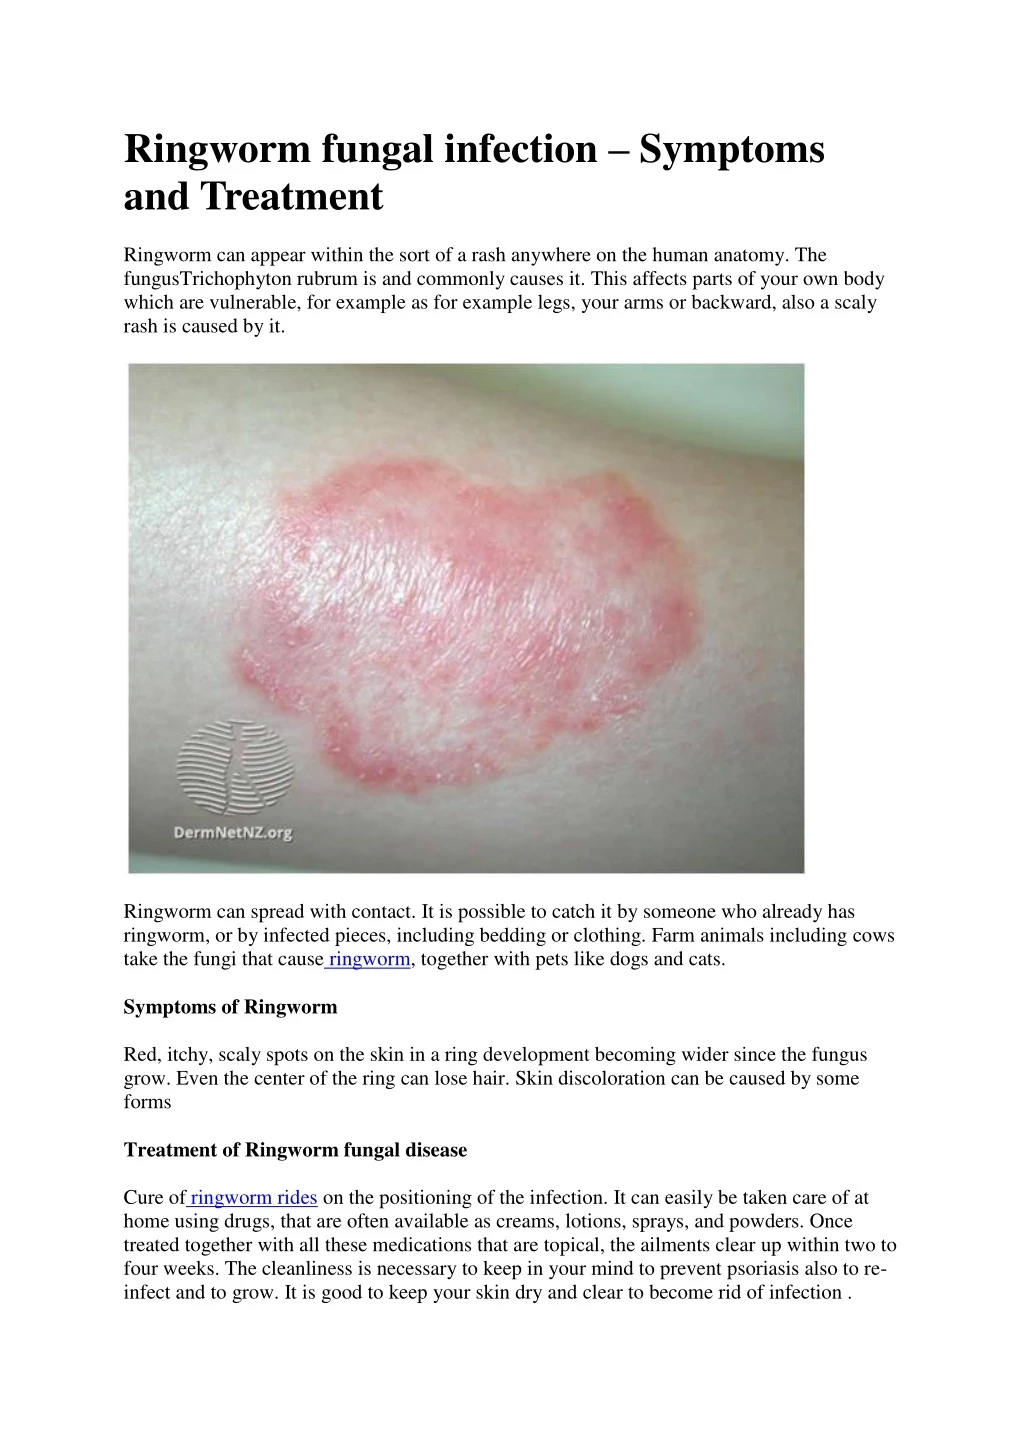 Ringworm: Symptoms, causes, diagnosis and treatments